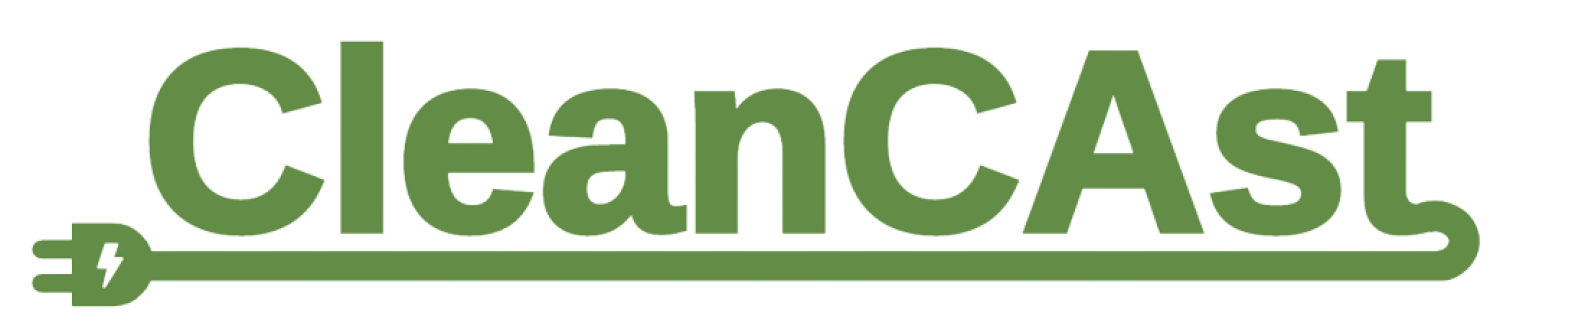 cleancast_logo_green.png